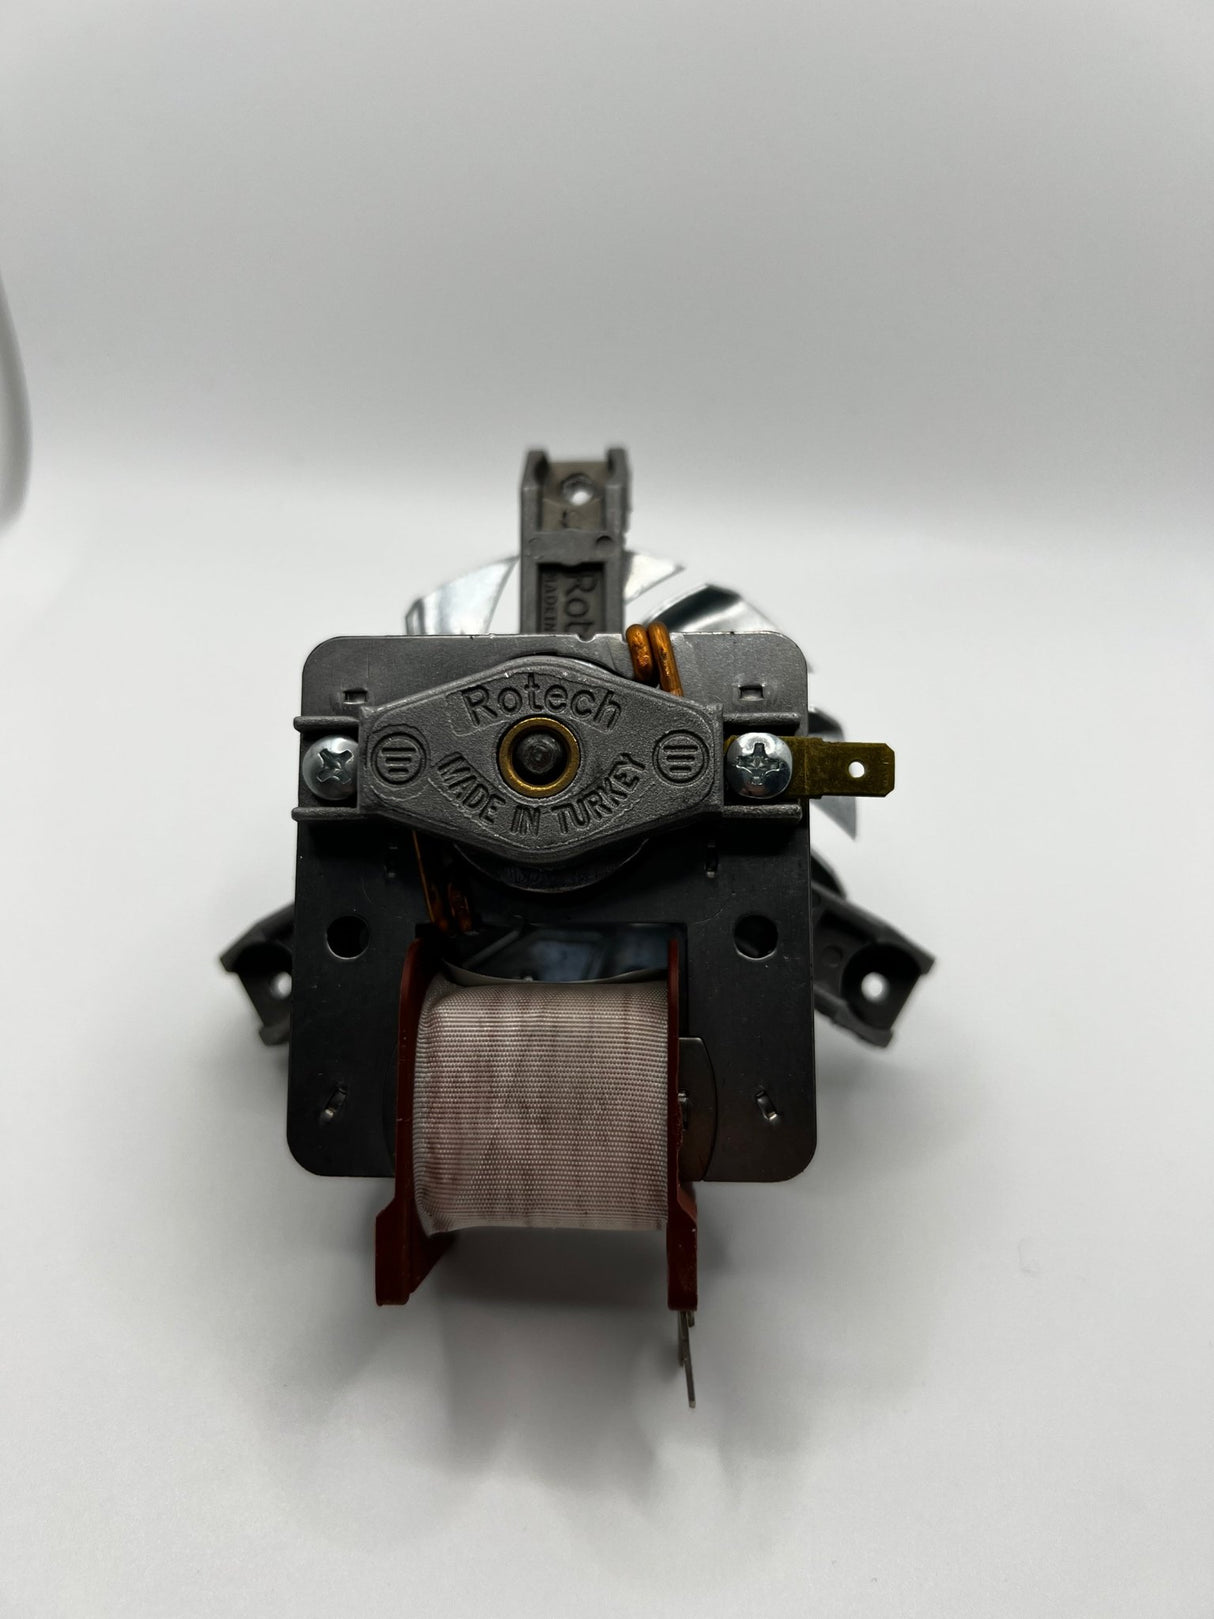 Beko / Euromaid Oven Fan Motor 264440102 - My Oven Spares-Euromaid-264440102-6